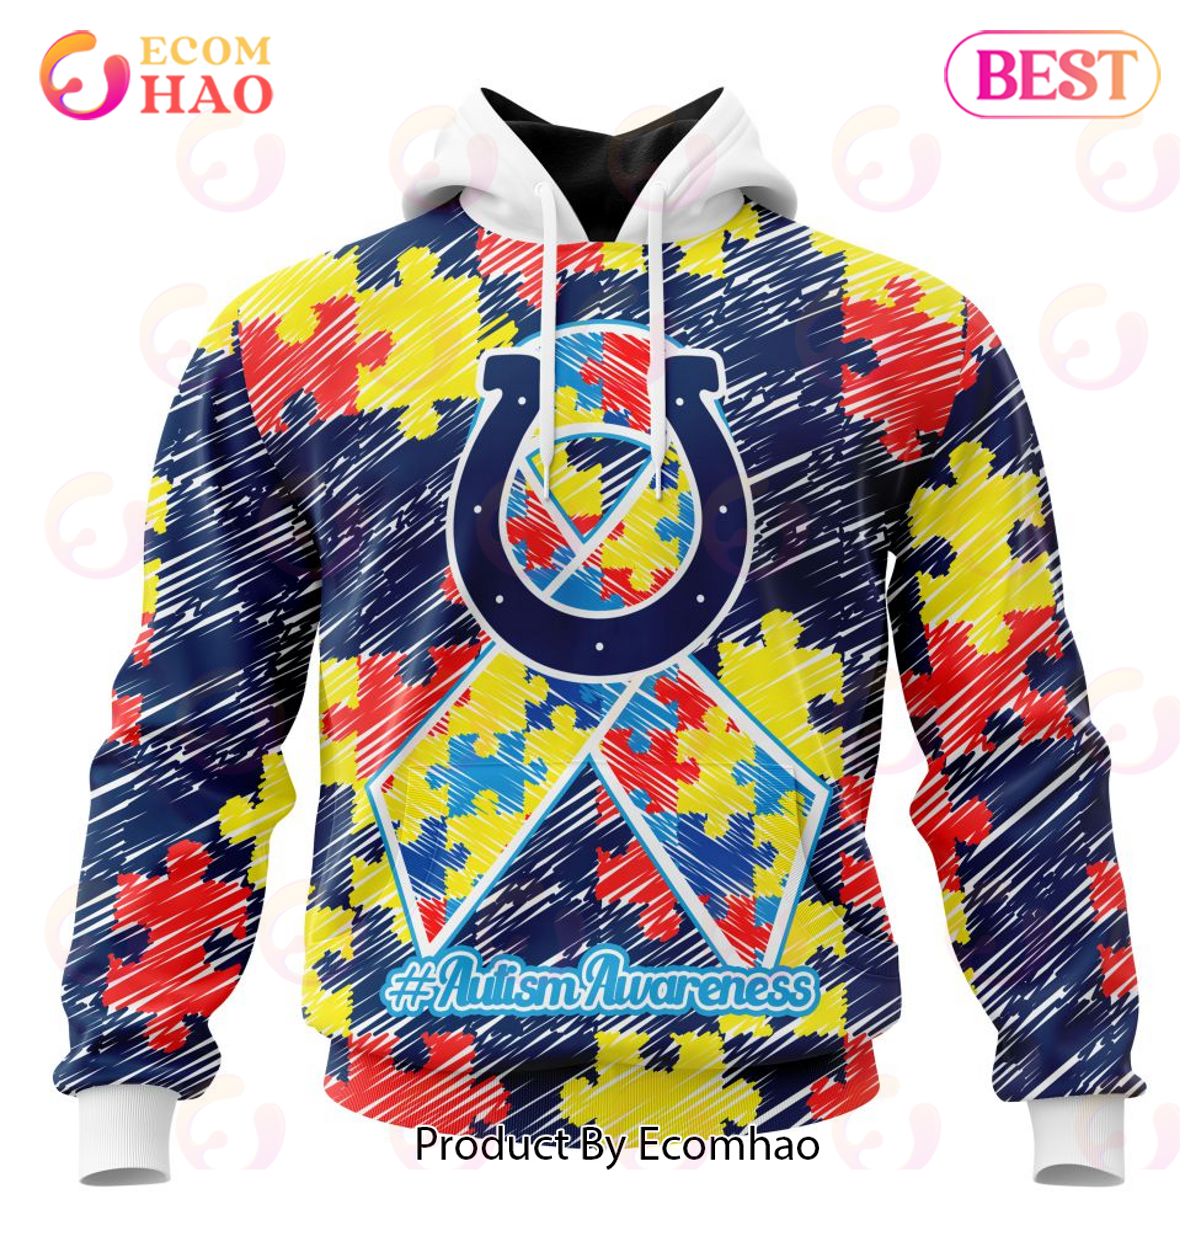 NFL Indianapolis Colts Special Autism Awareness Design 3D Hoodie